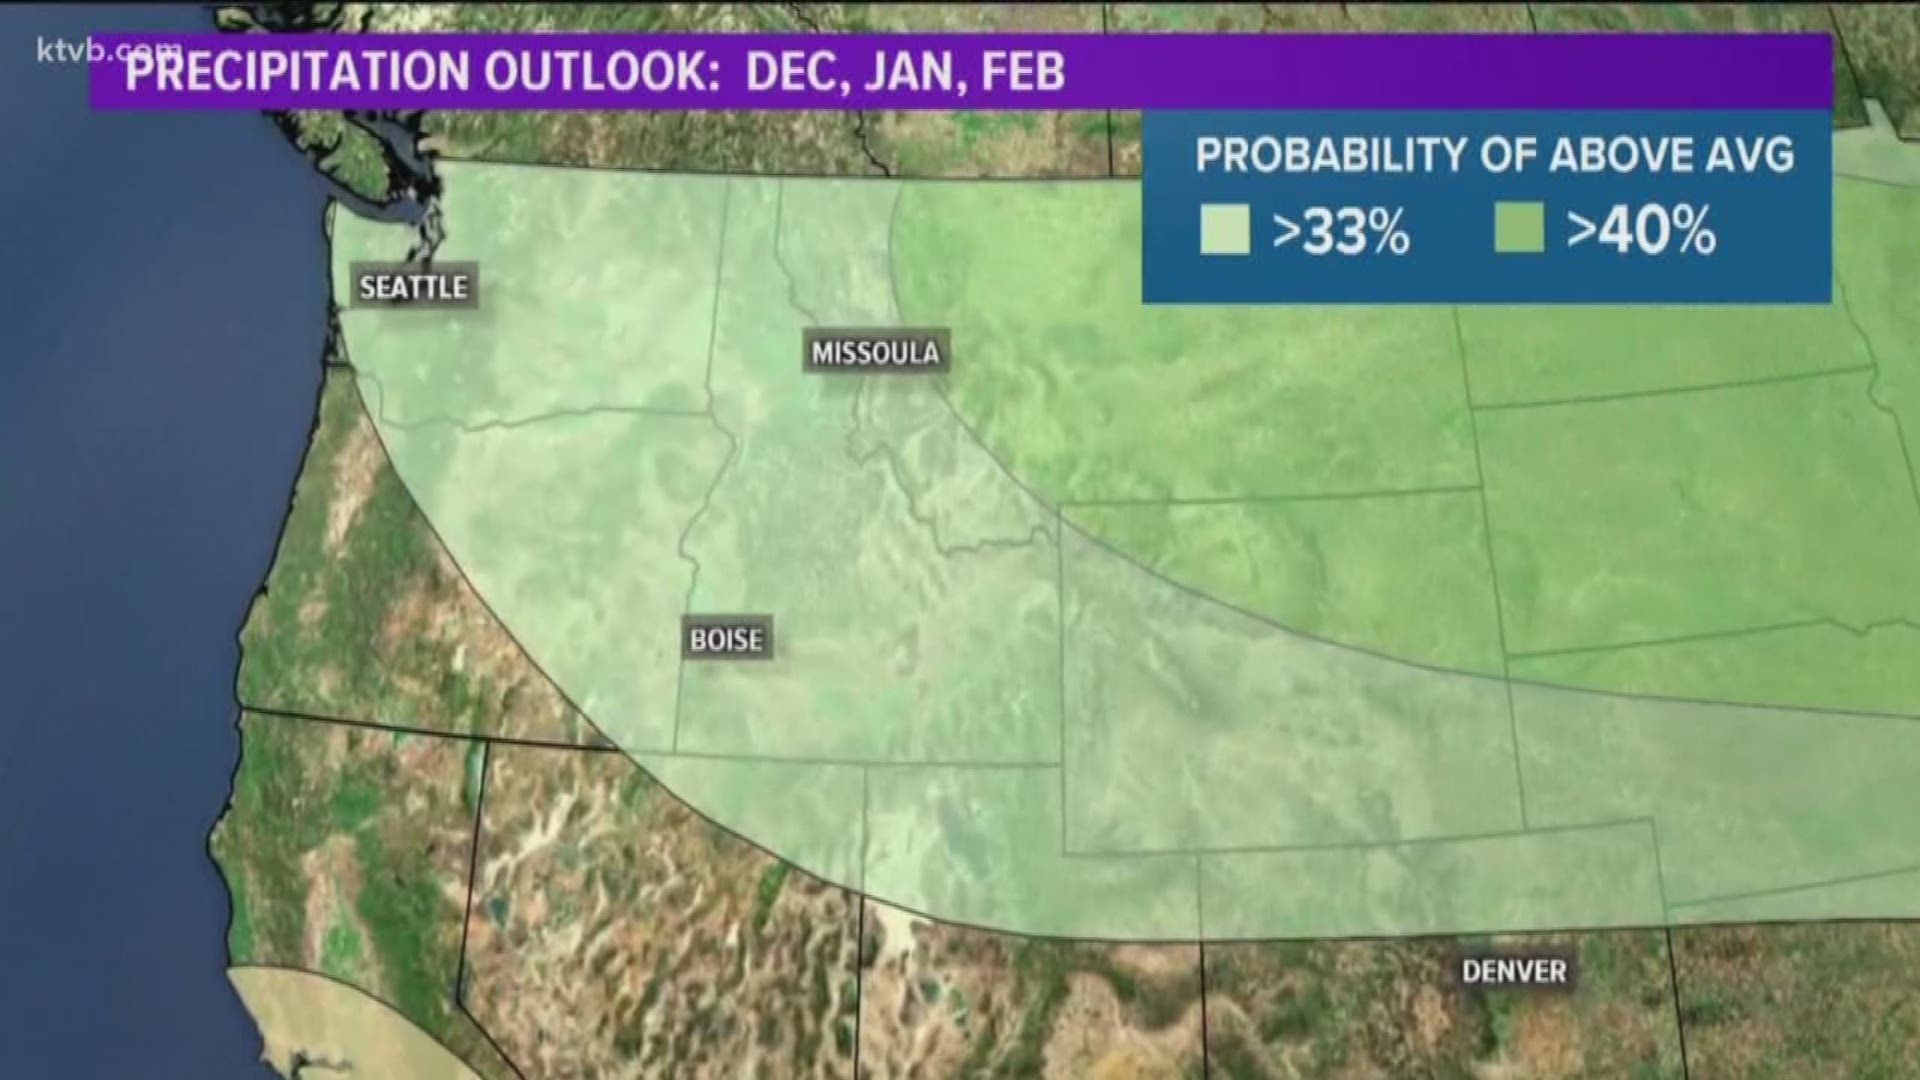 The million-dollar question: Could we be looking at another Snowpocalypse? Meteorologist Bri Eggers takes a look at what we can predict for the 2019-2020 winter.